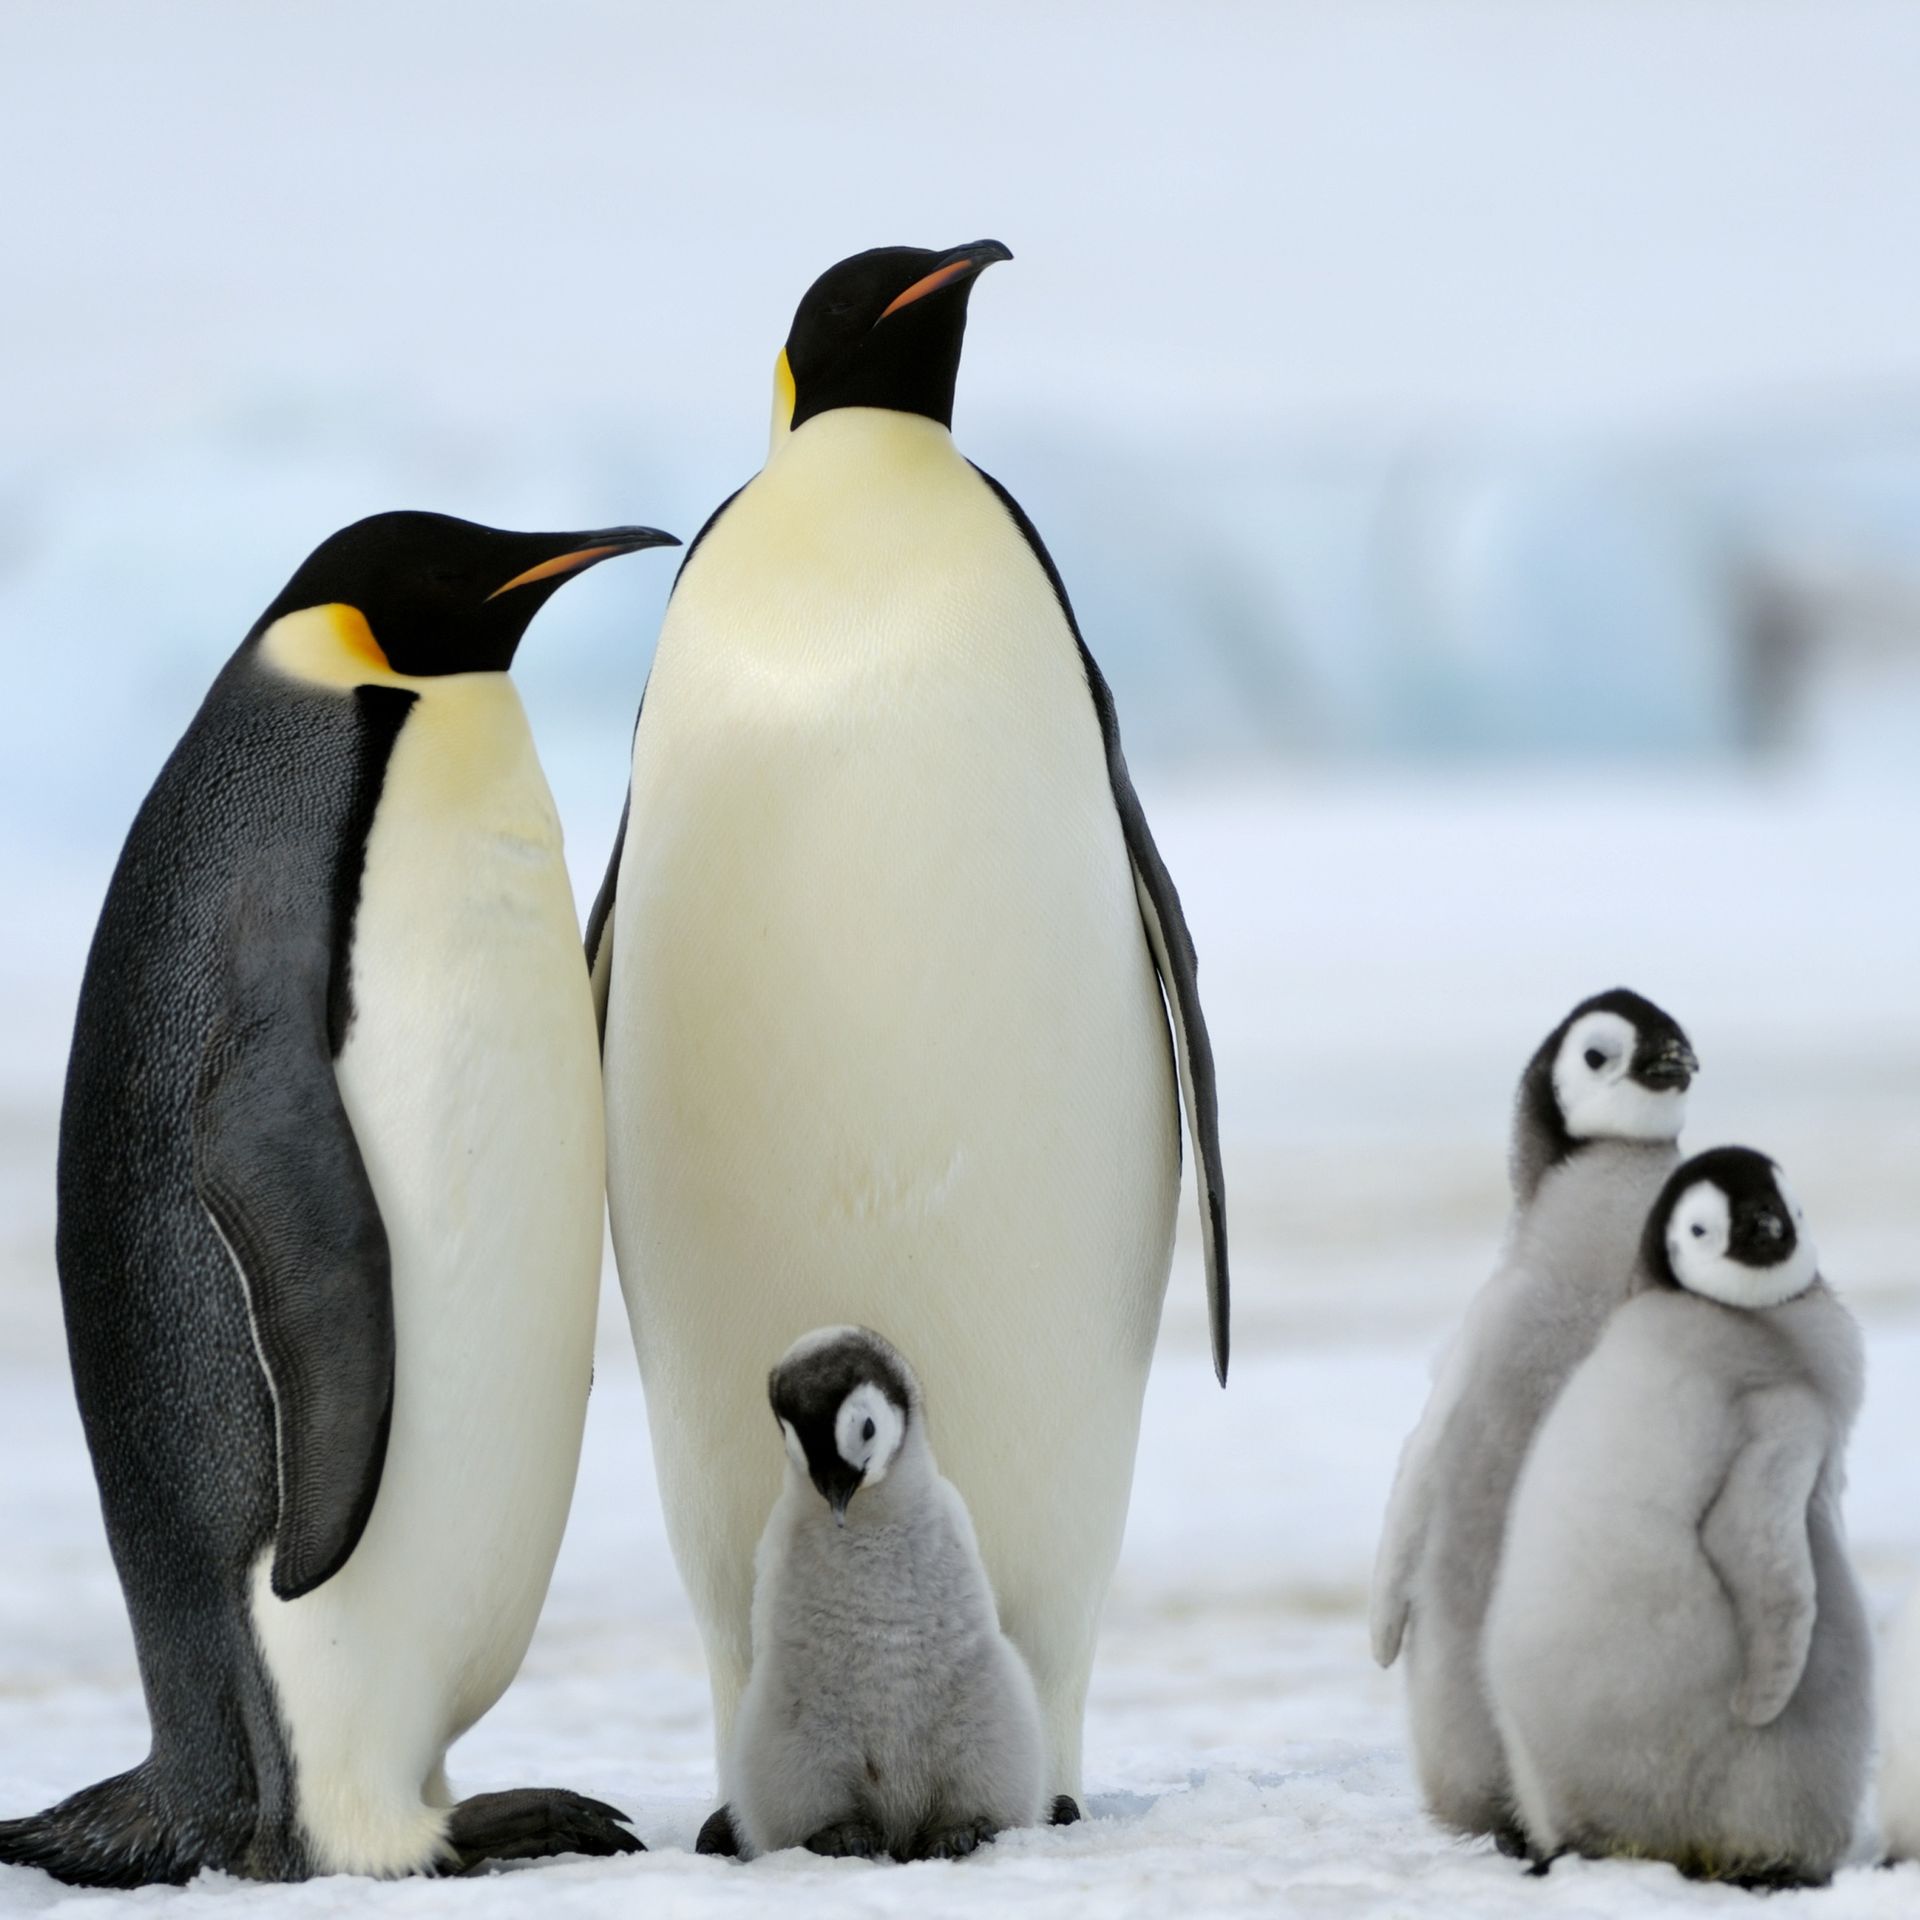 Emperor penguin colonies lost all their chicks due to ice breakup